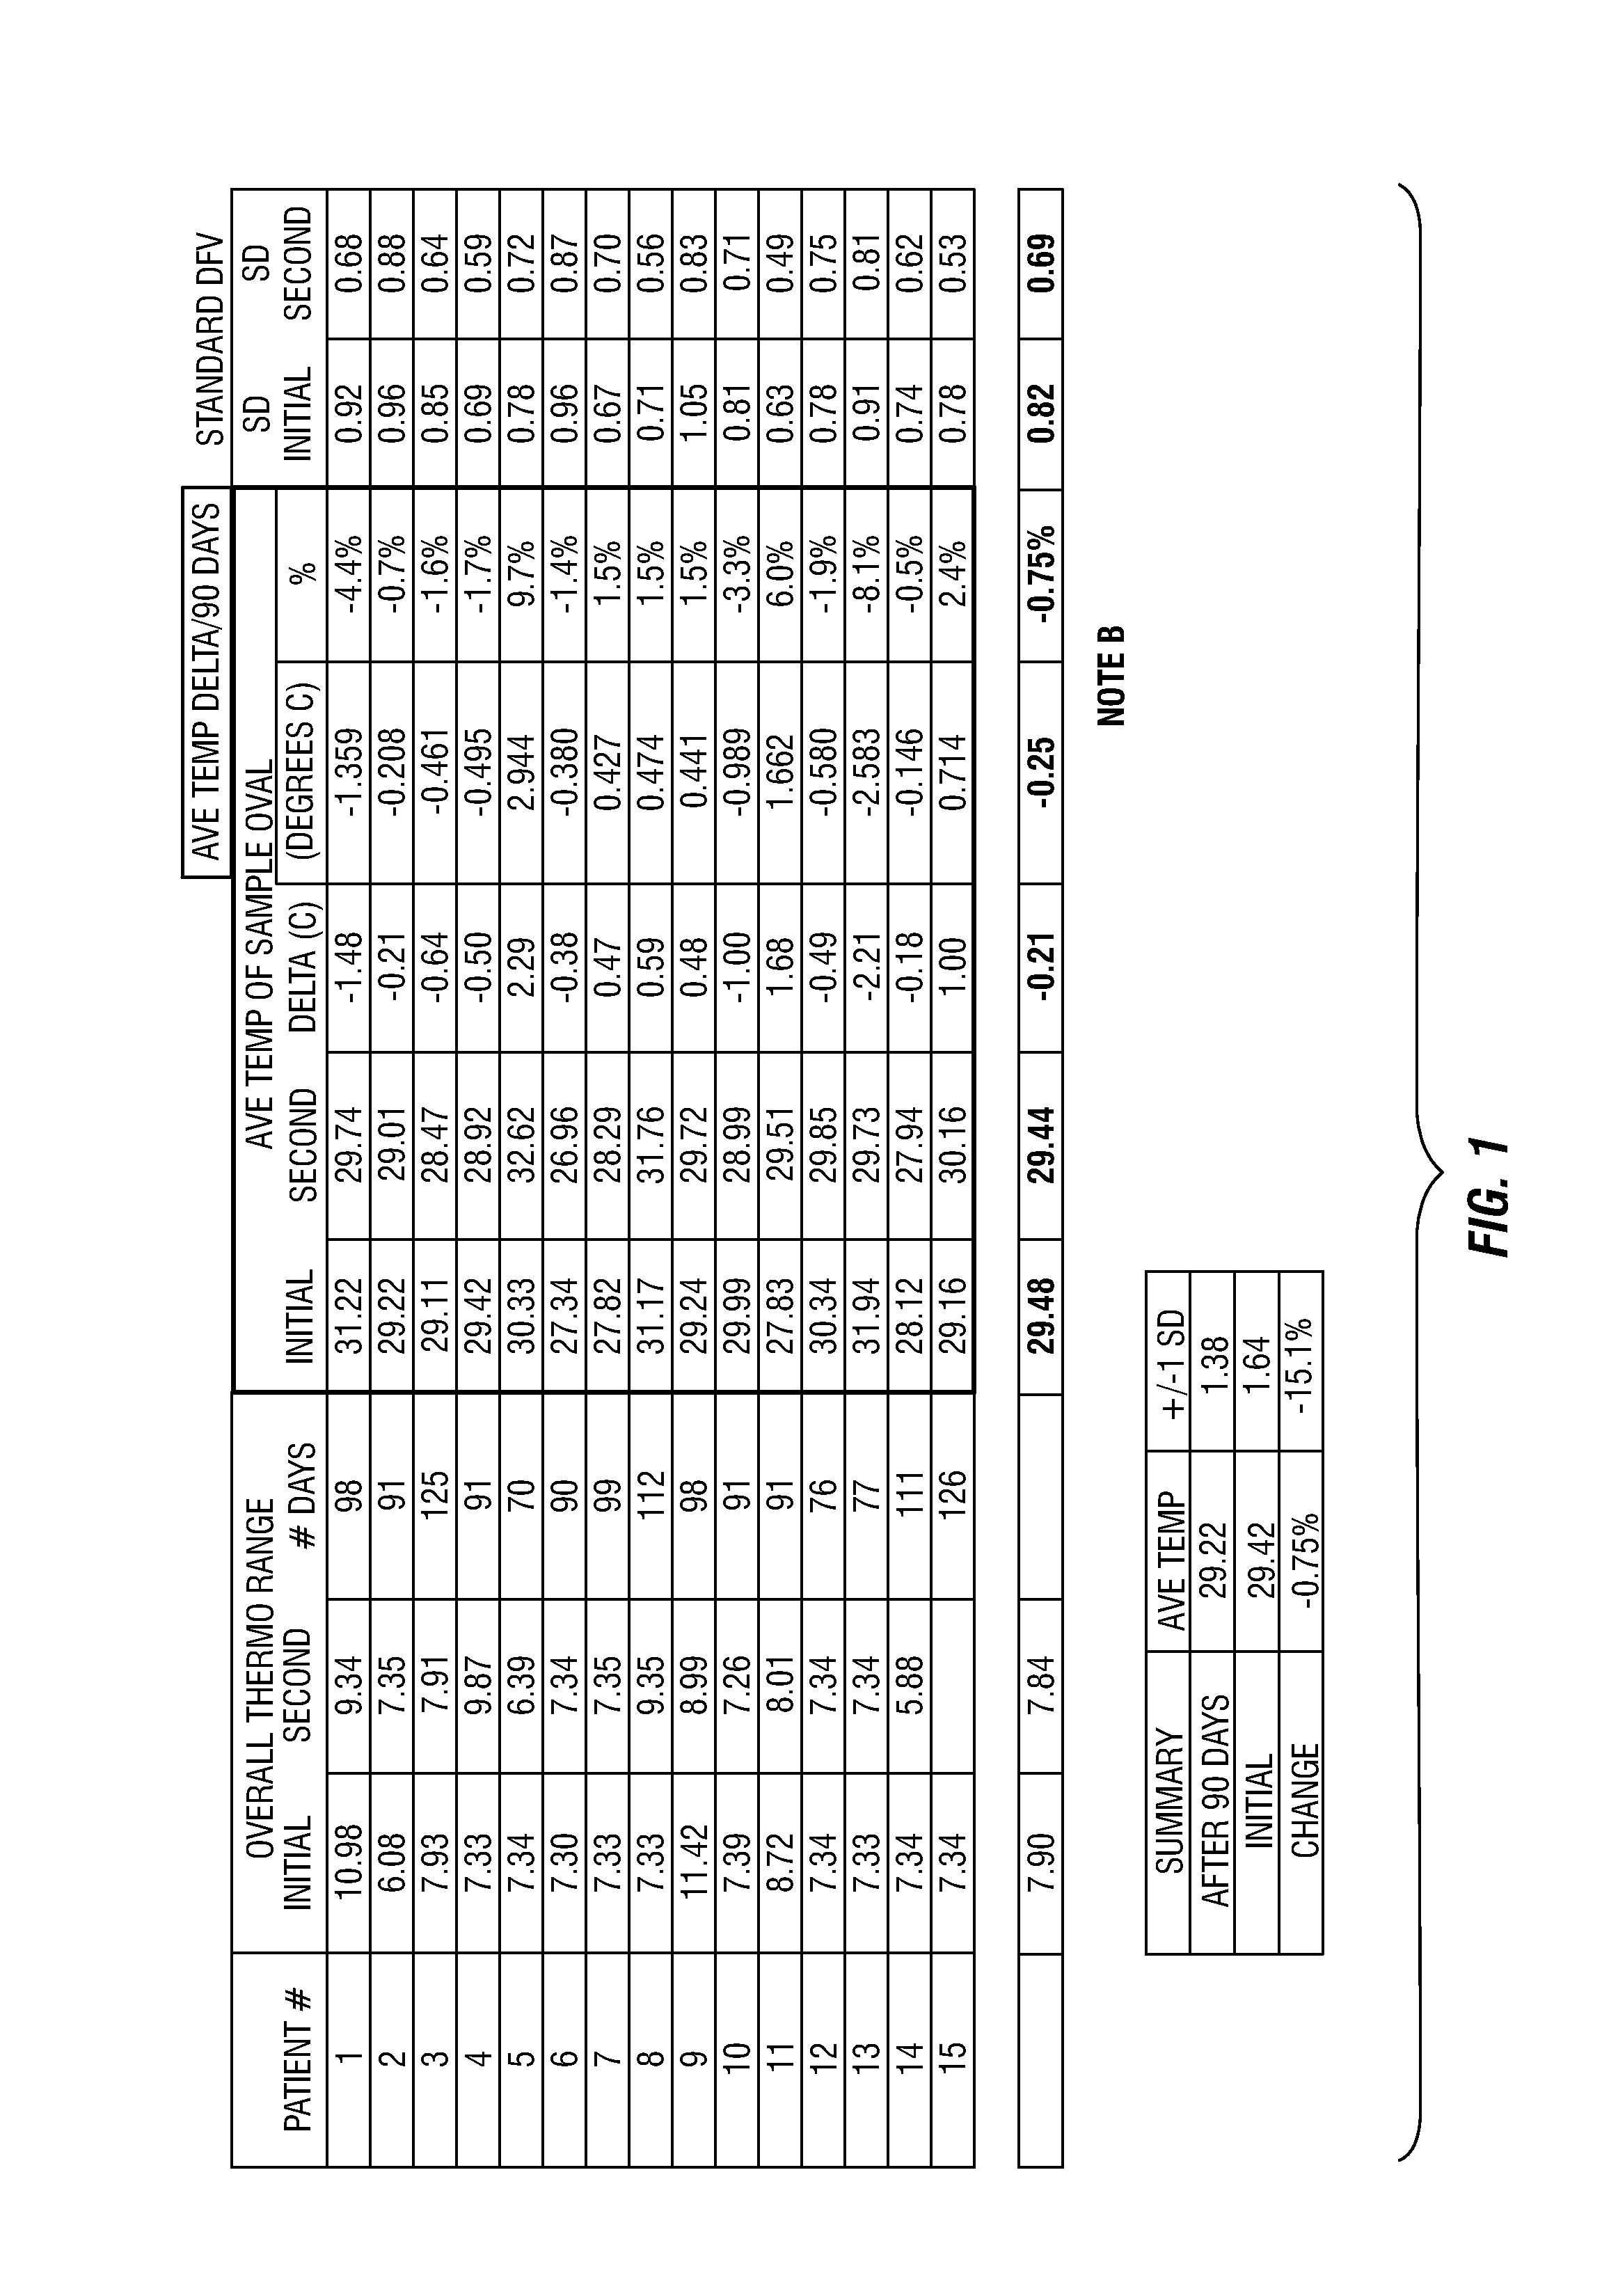 Topical Anti-inflammatory compositions and uses thereof